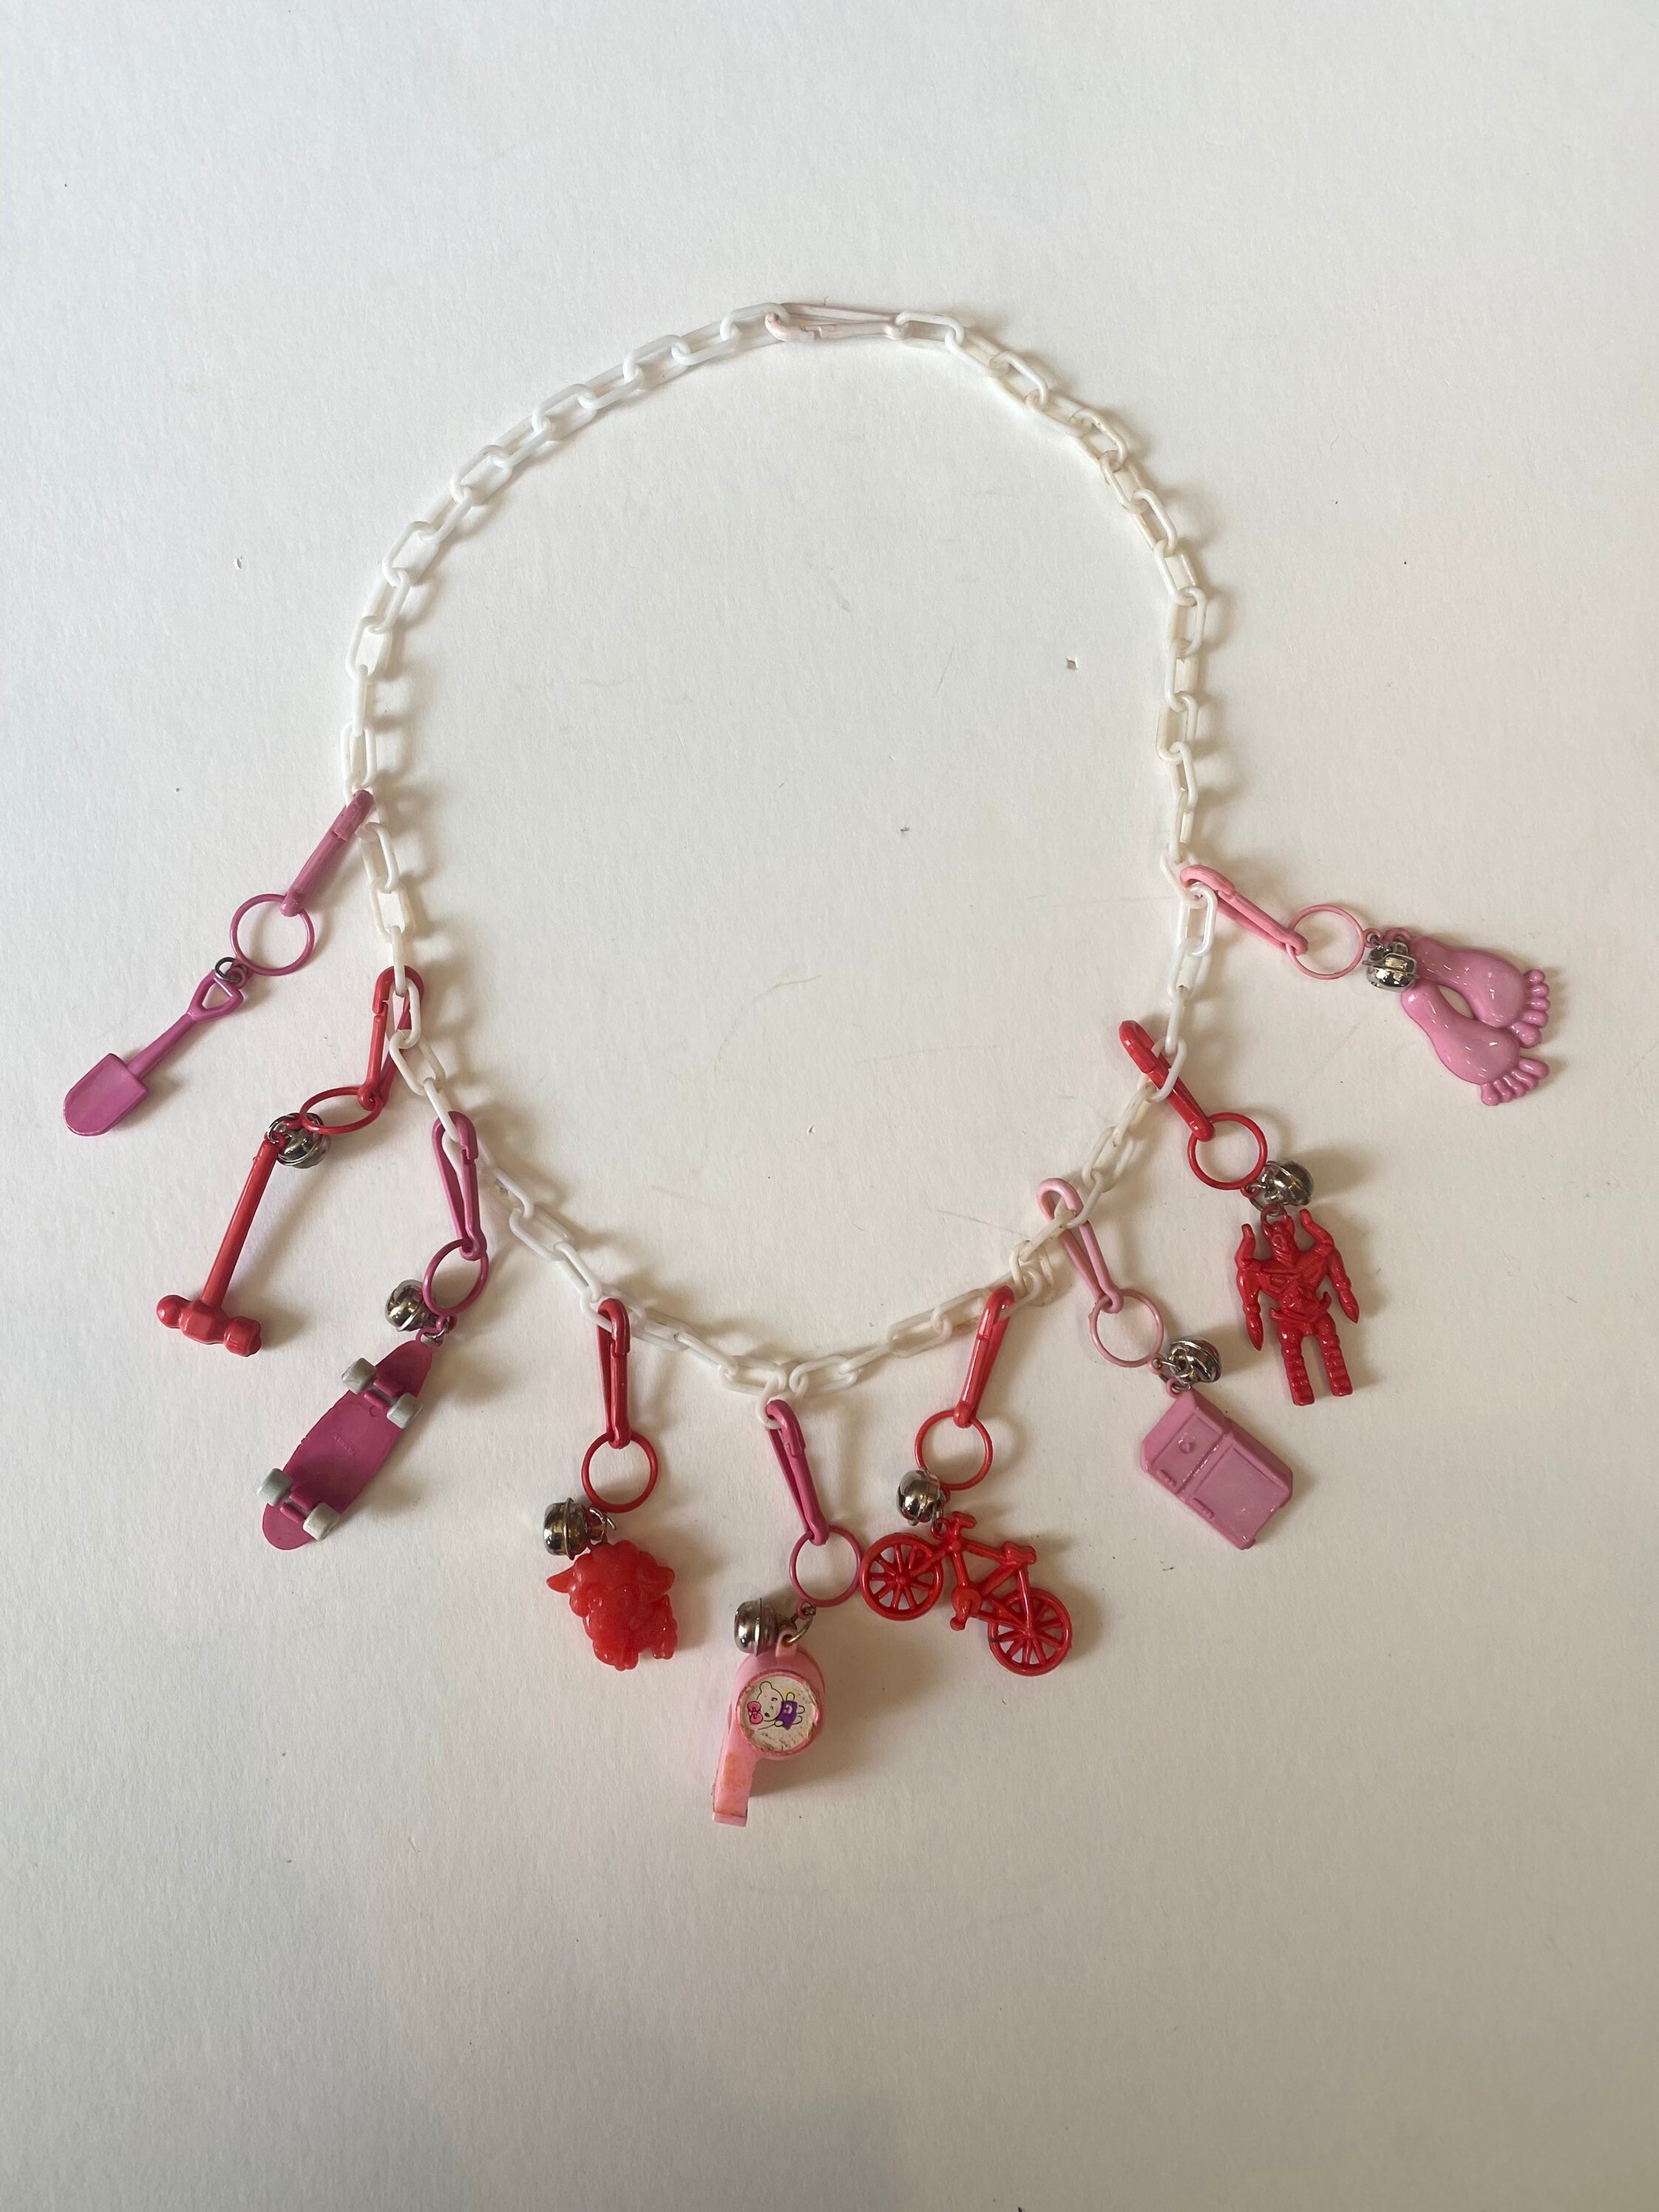 Vintage 1980s Plastic Clip On Bell Charm Necklace With 44 Charms - $107 -  From Annette